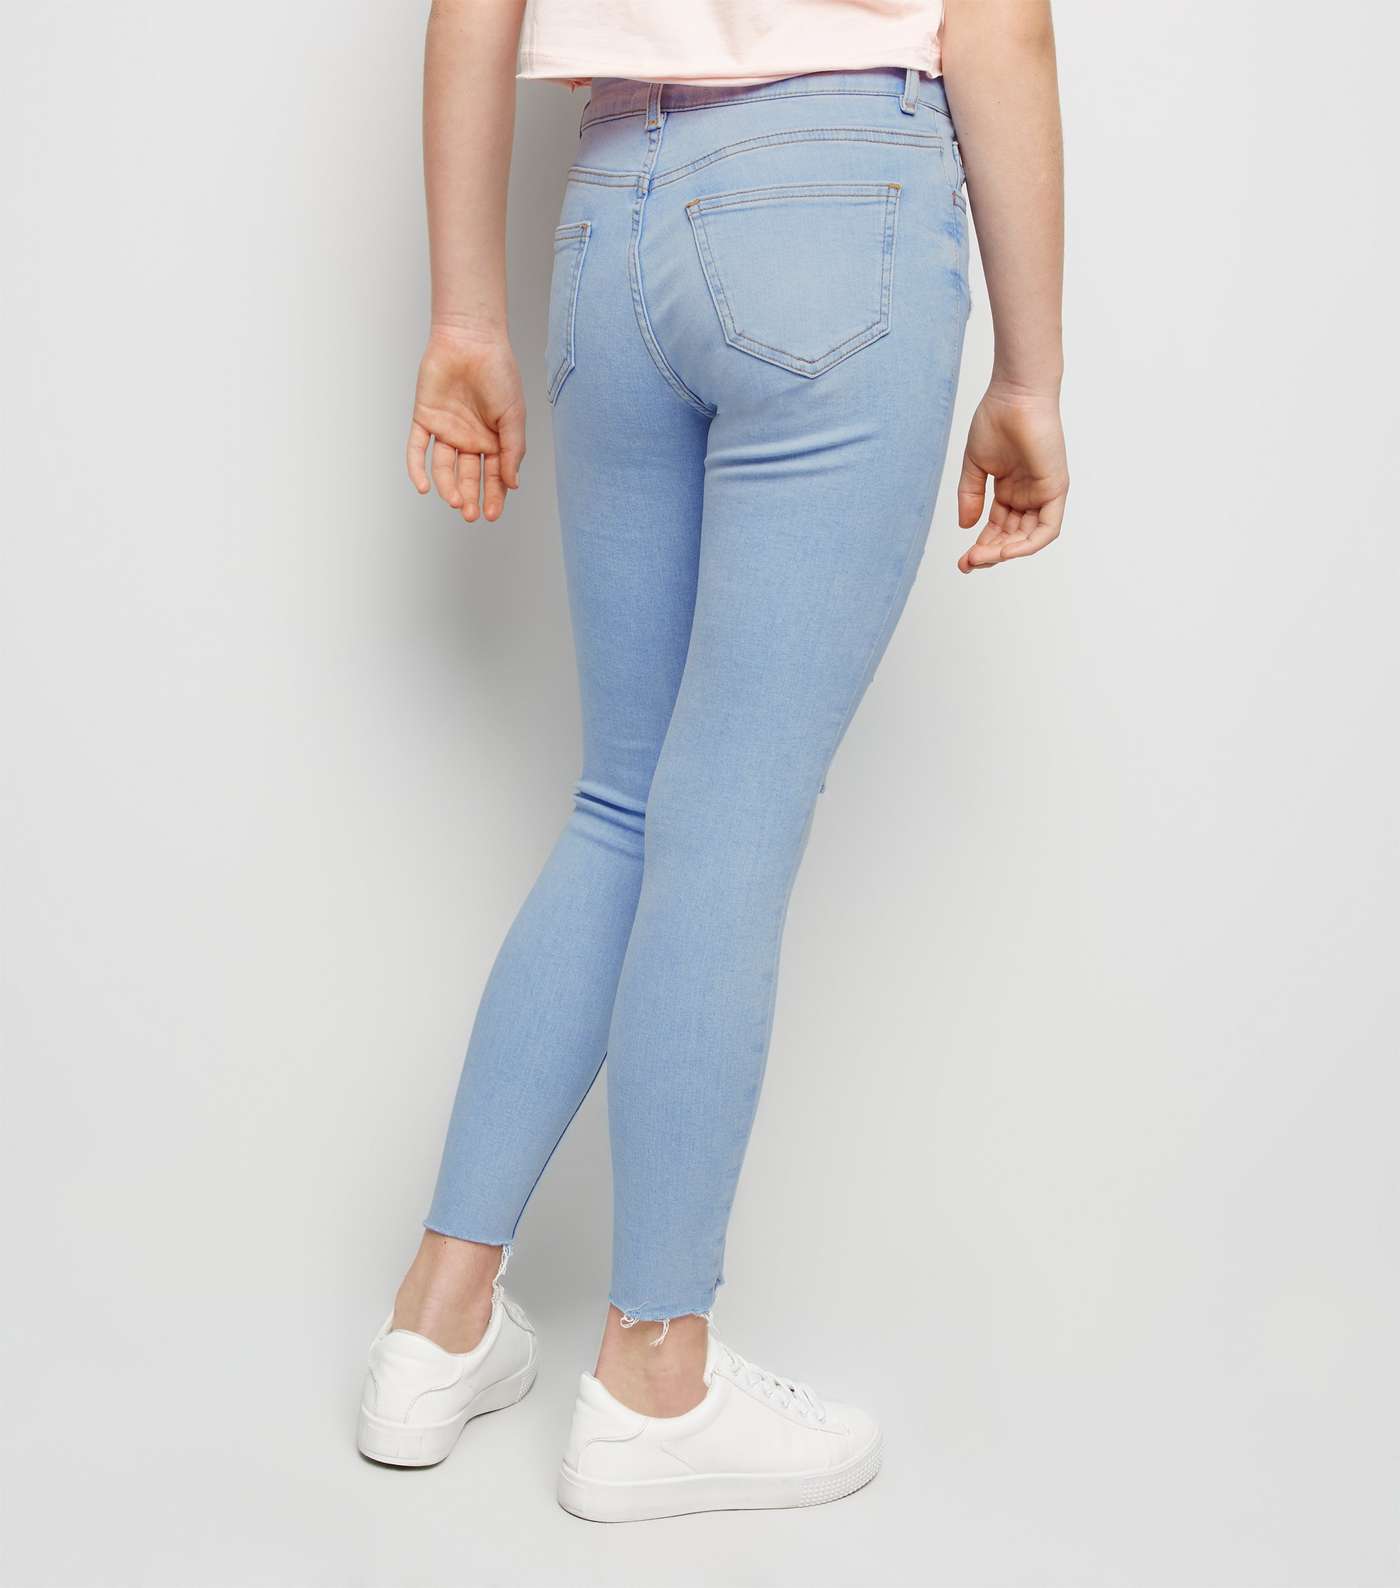 Girls Blue Bleach Wash Ripped Skinny Jeans Image 3